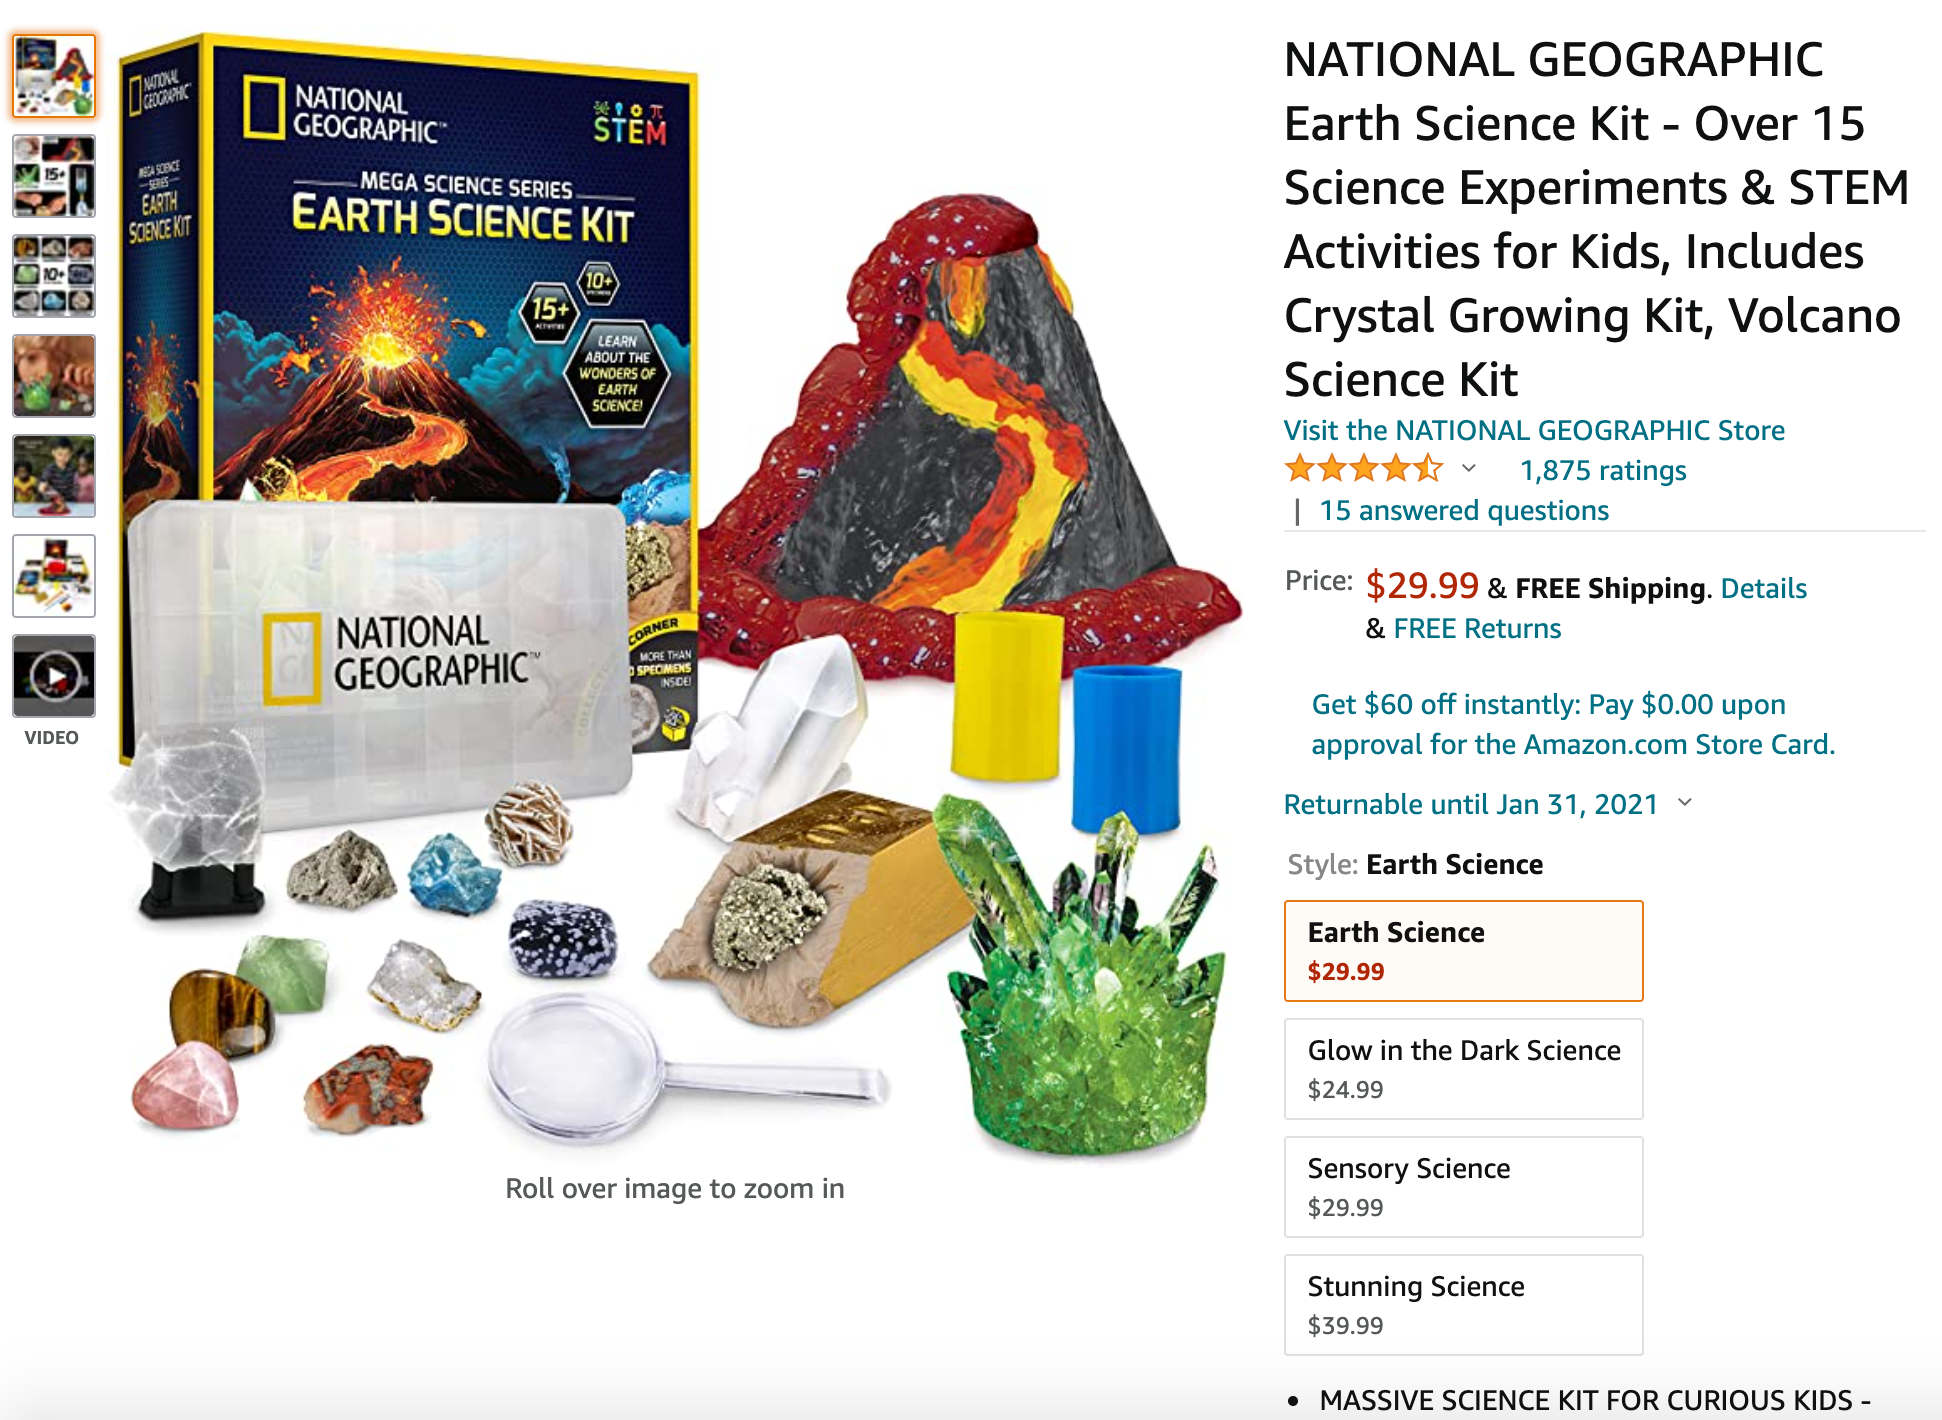 NATIONAL GEOGRAPHIC Earth Science Kit - Over 15 Science Experiments.jpg